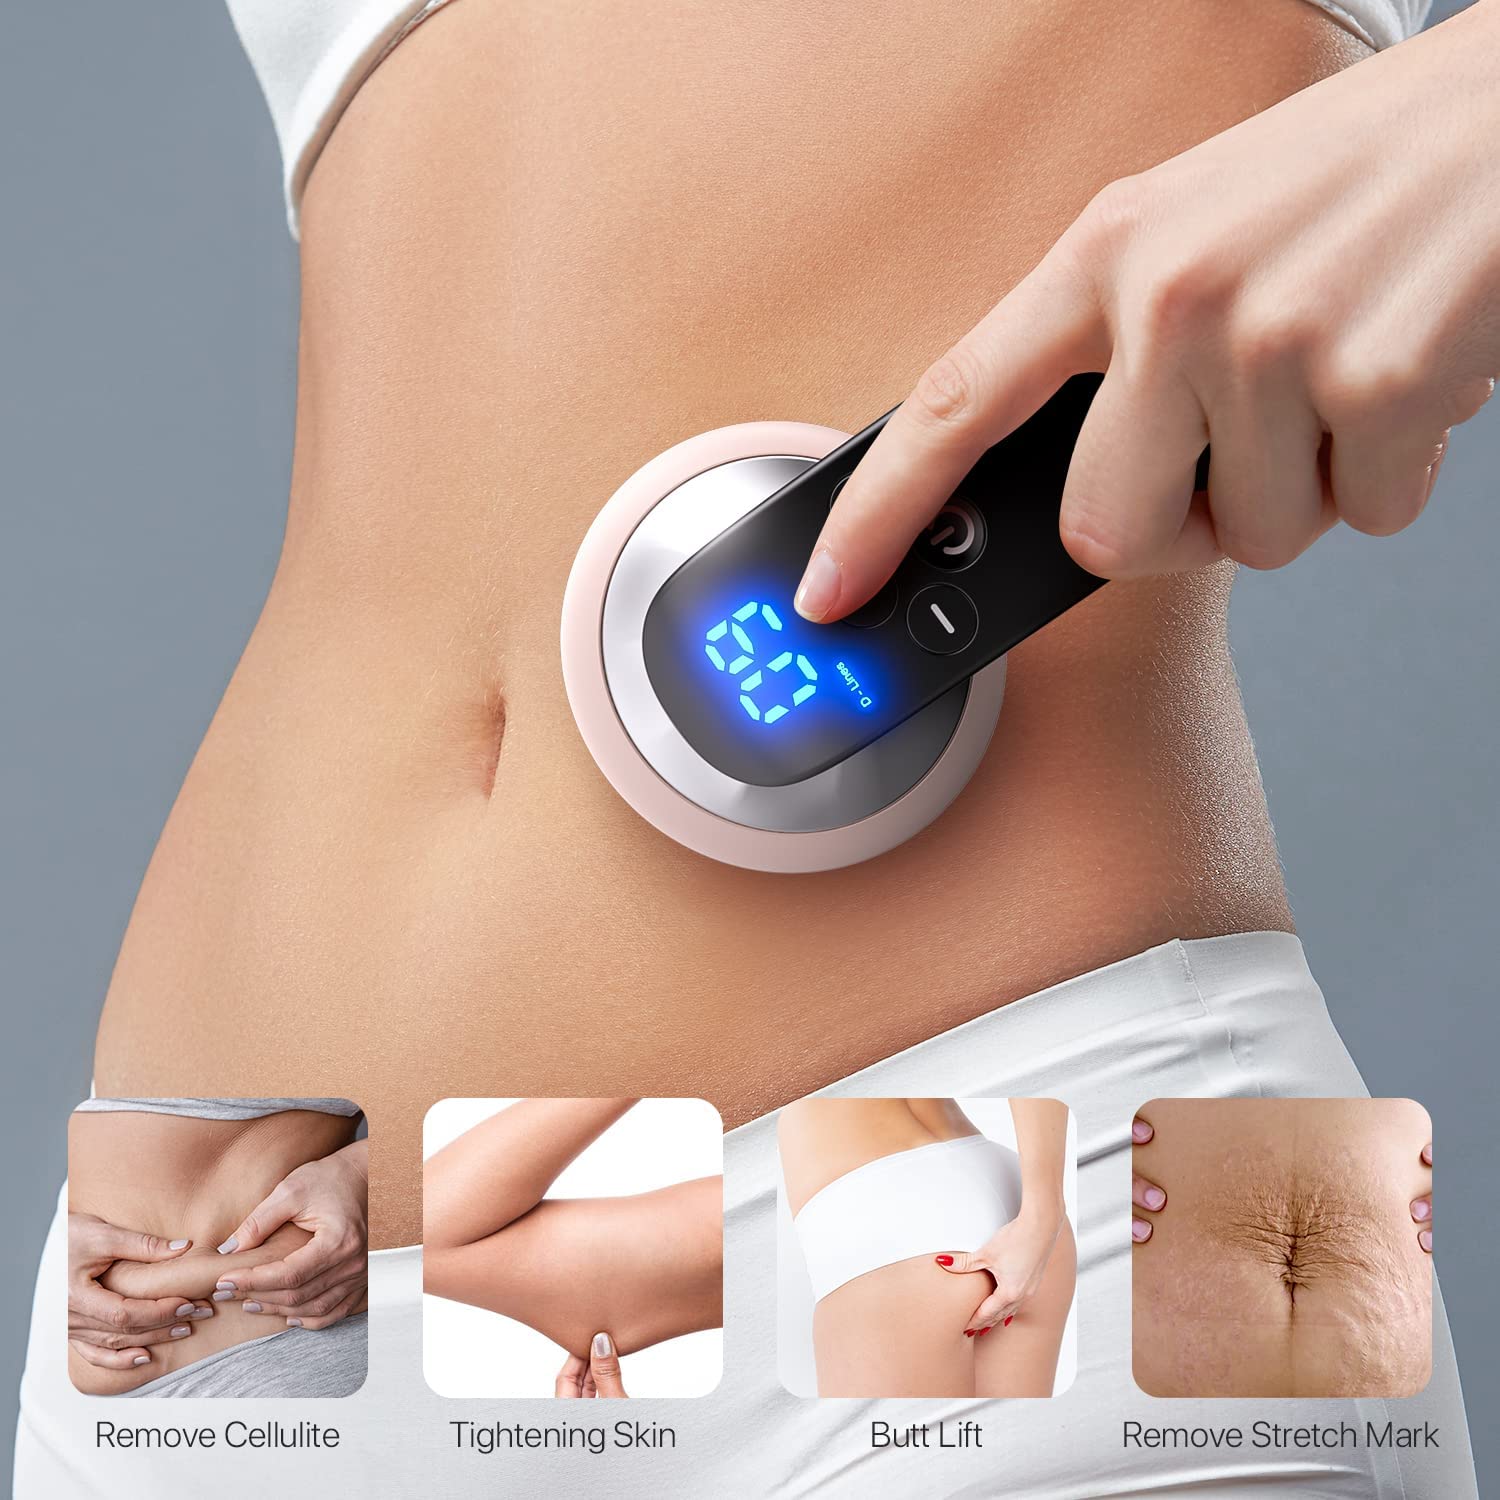 Body Sculpting Machine Cellulite Massager with 6 Skin Friendly Washable  Pads, Body Massager for Belly Legs Butt Arms